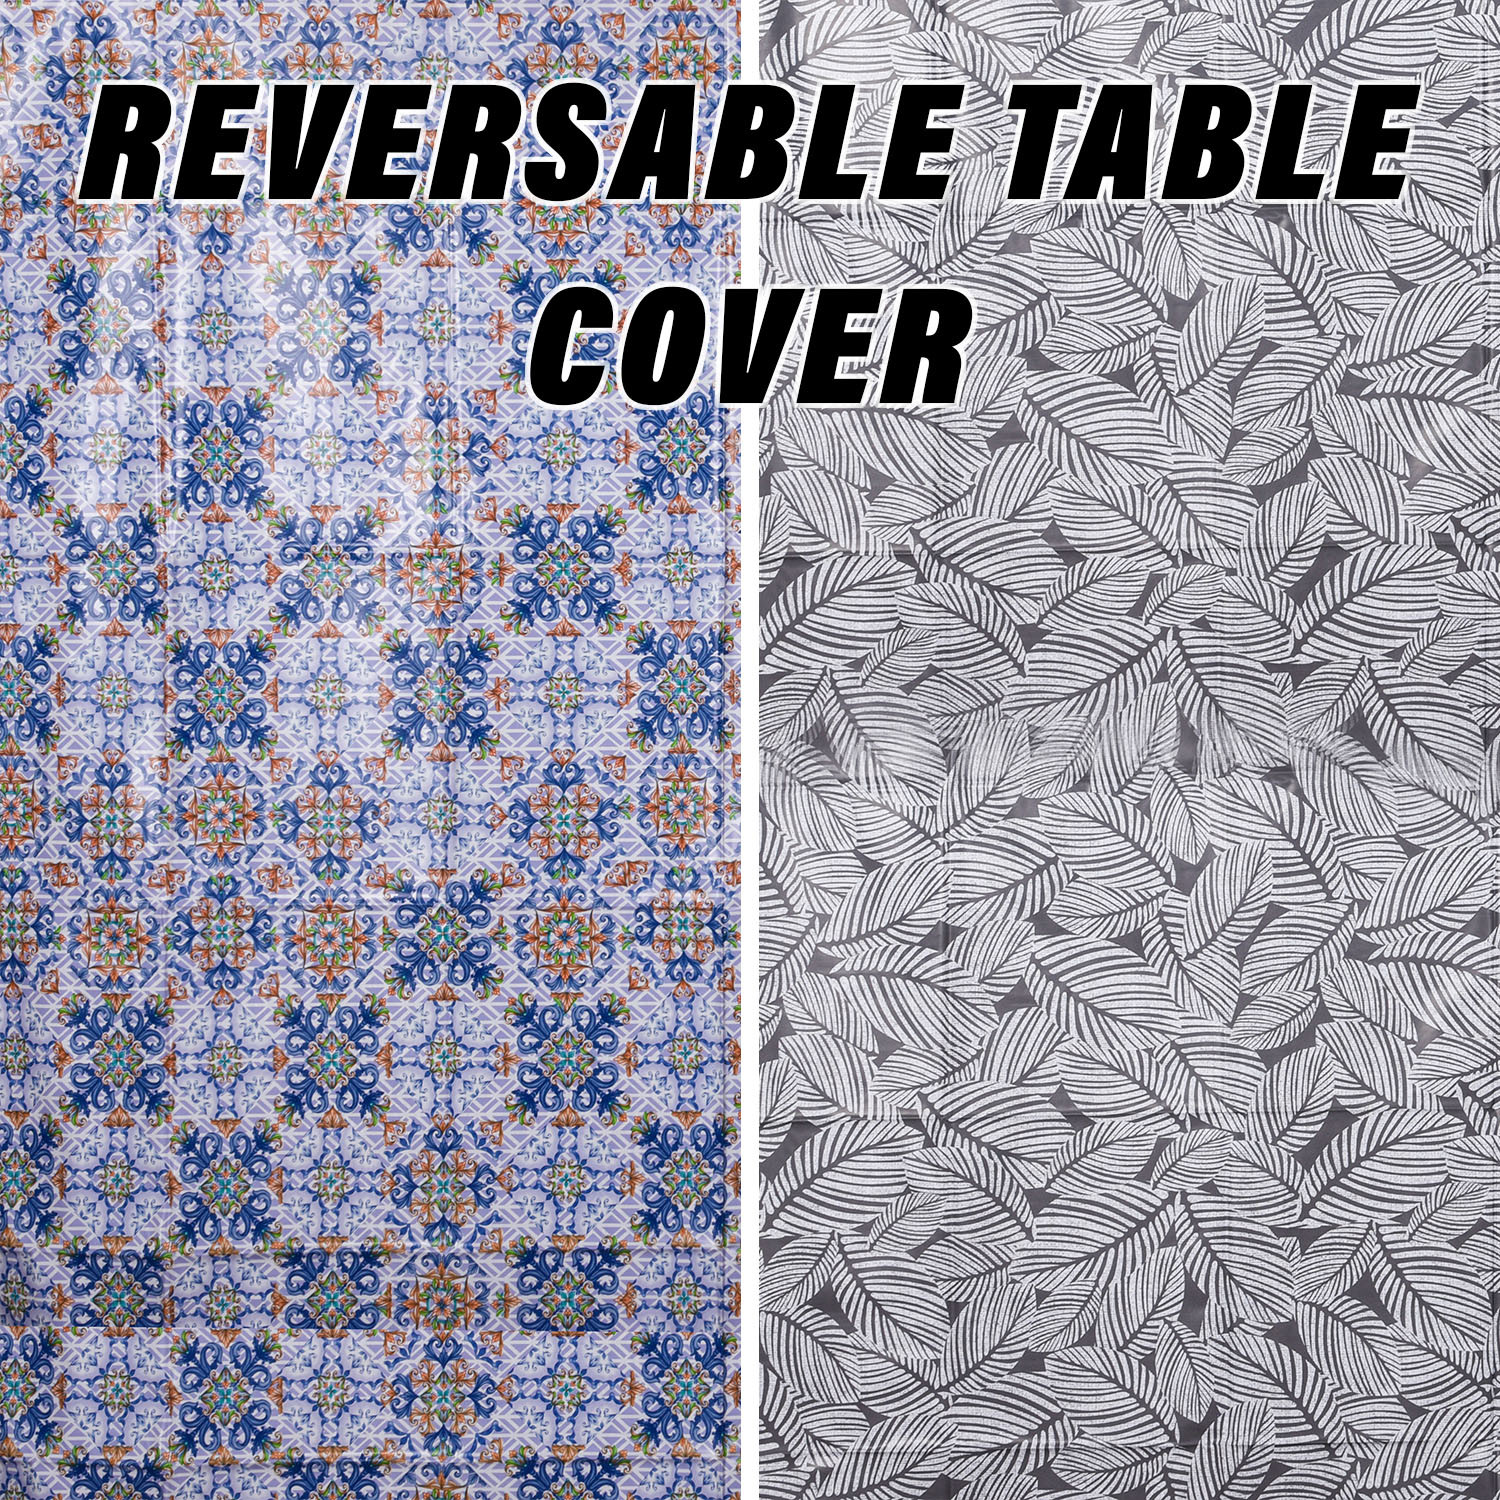 Kuber Industries Table Cover | Dining Table Cover | Center Table Cover | Reversable Table Cover for Kitchen Table | Star Flower Table Cover for Hall Décor | 54x54 Inch | Blue